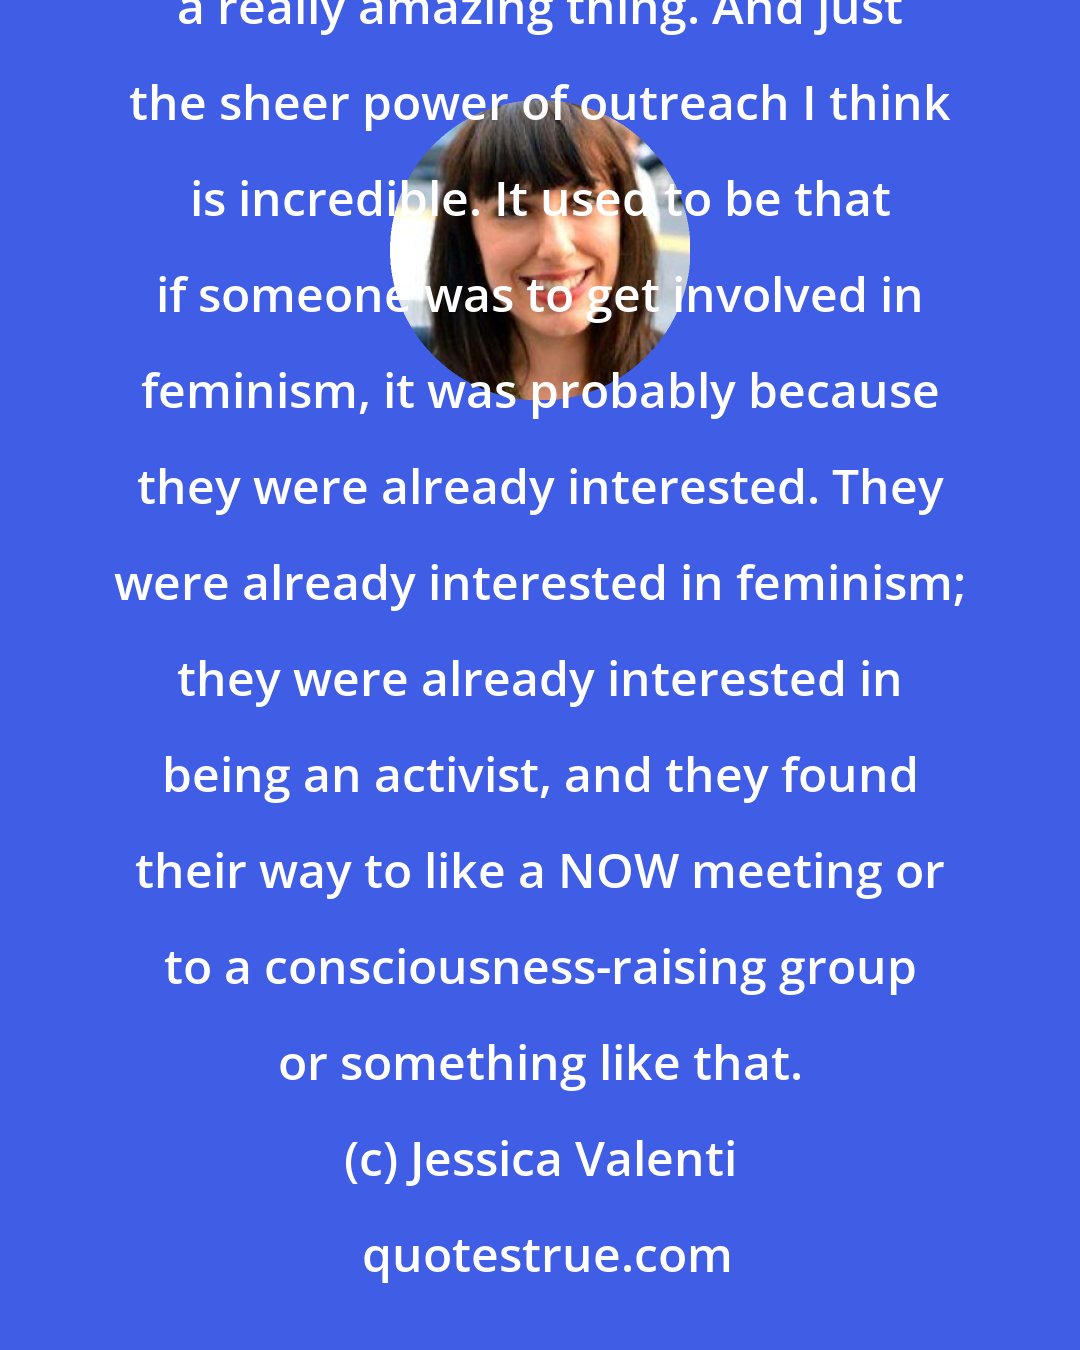 Jessica Valenti: I know I certainly wouldn't be writing books if it hadn't been for the feminist blogosphere, and I think that's a really amazing thing. And just the sheer power of outreach I think is incredible. It used to be that if someone was to get involved in feminism, it was probably because they were already interested. They were already interested in feminism; they were already interested in being an activist, and they found their way to like a NOW meeting or to a consciousness-raising group or something like that.